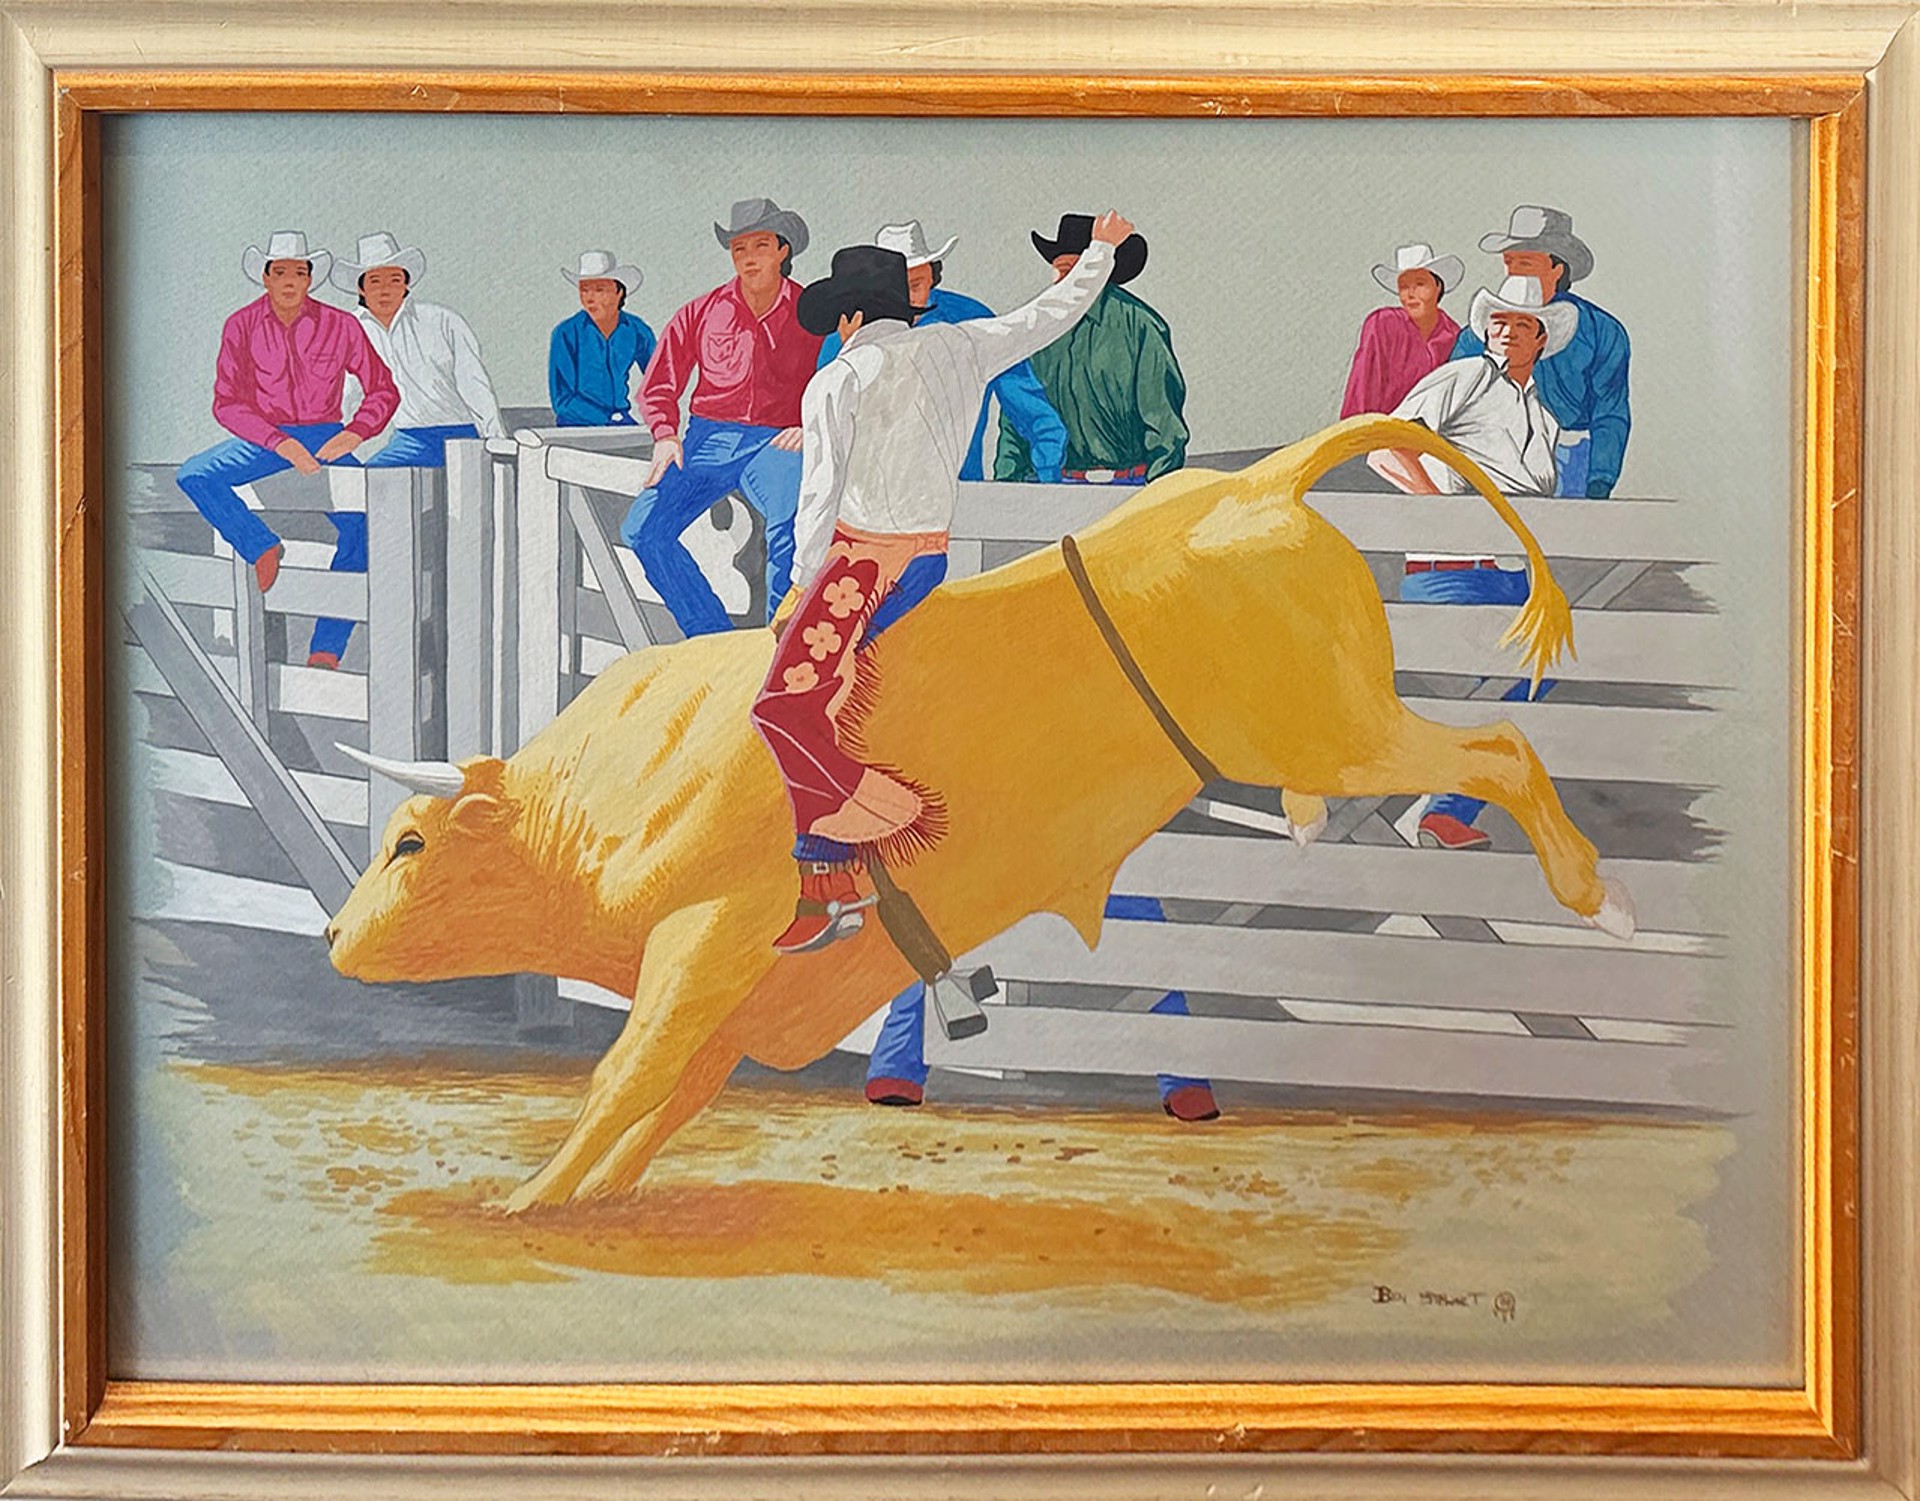 At the Rodeo, Bucking Bull by Ben Stewart